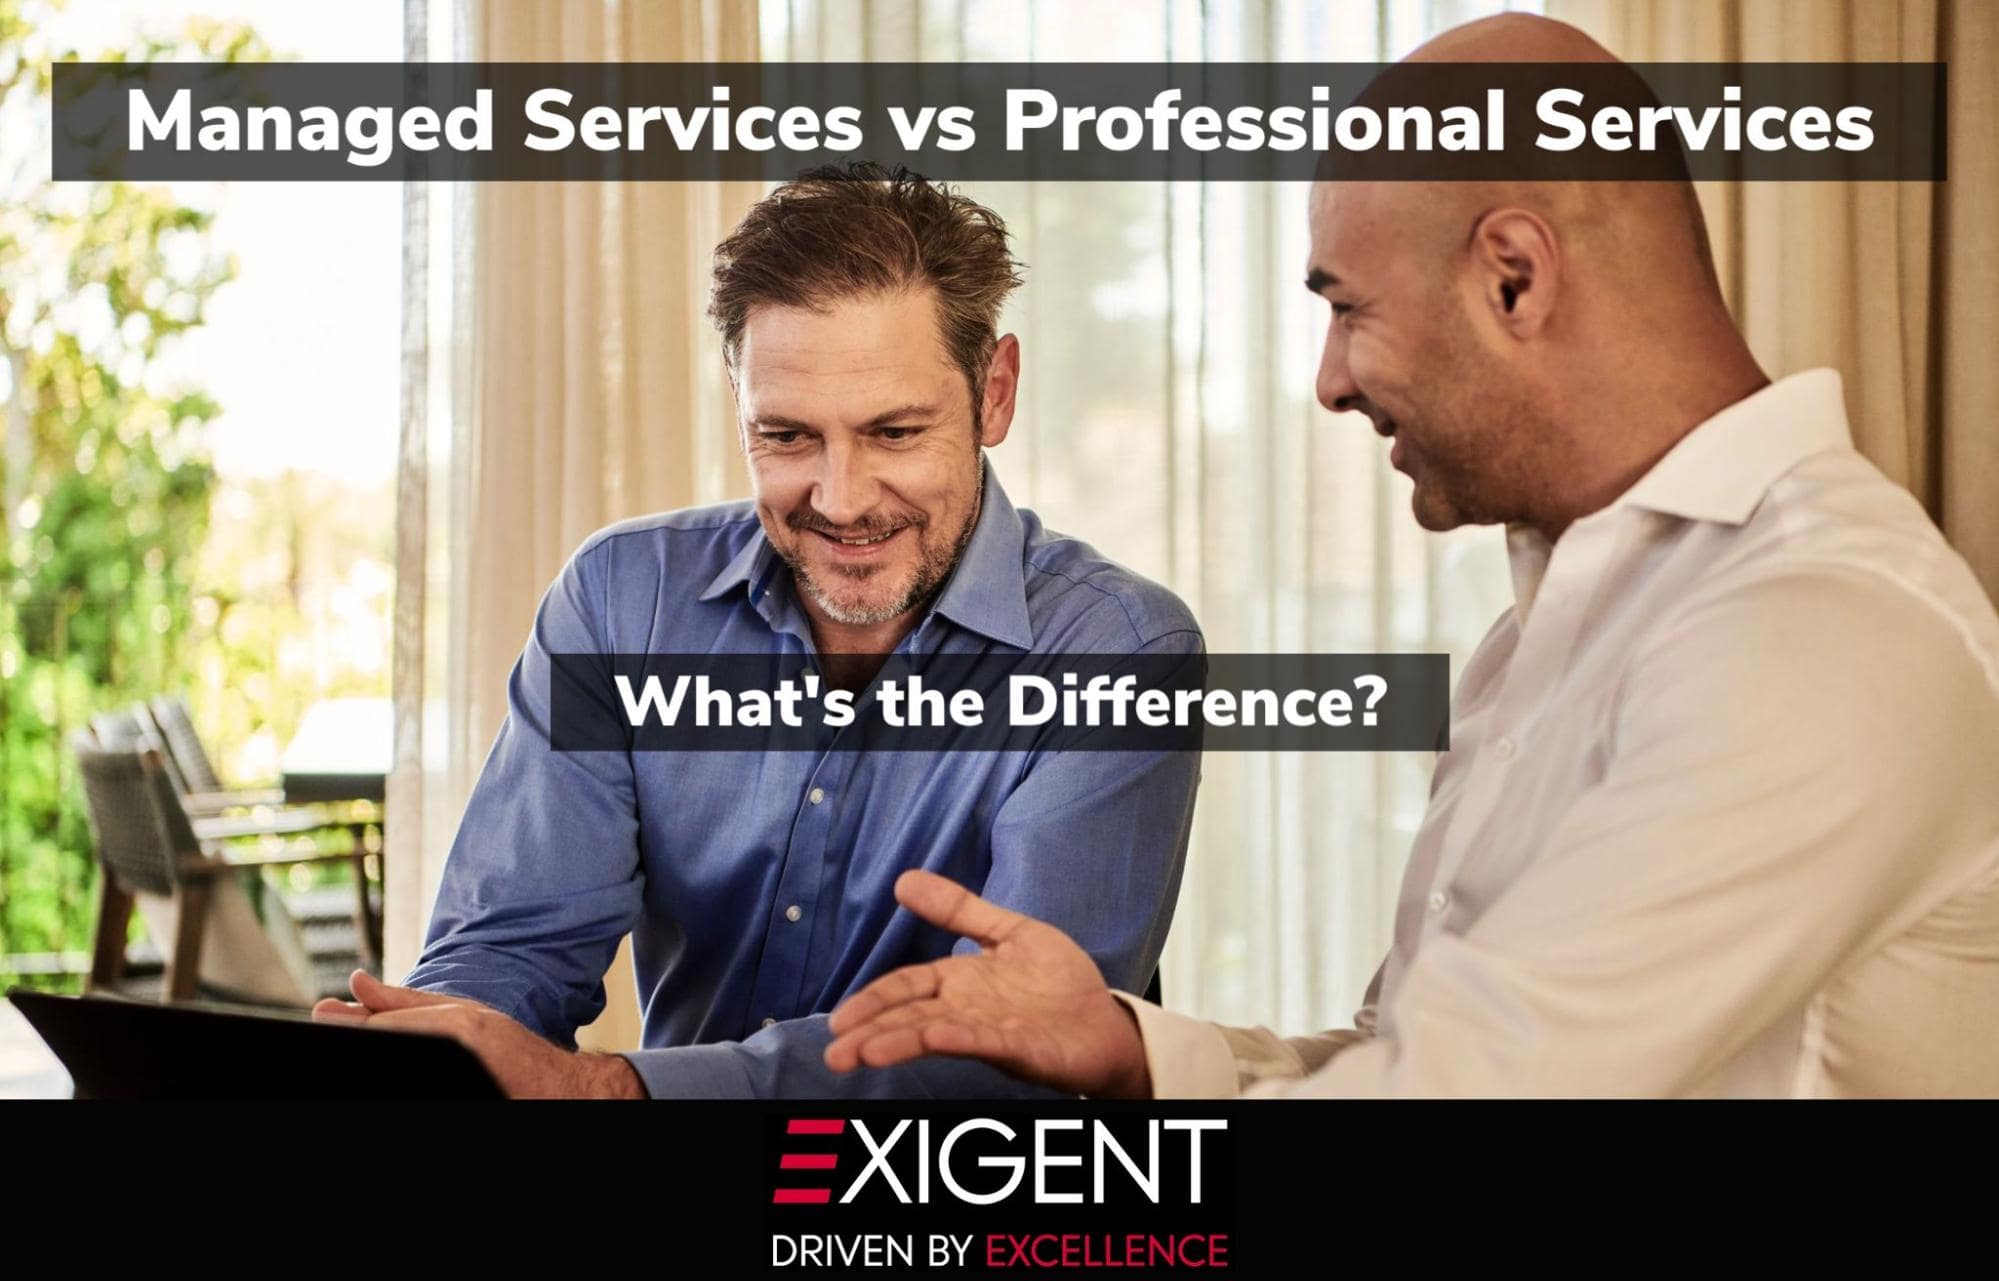 Managed Services vs. Professional Services